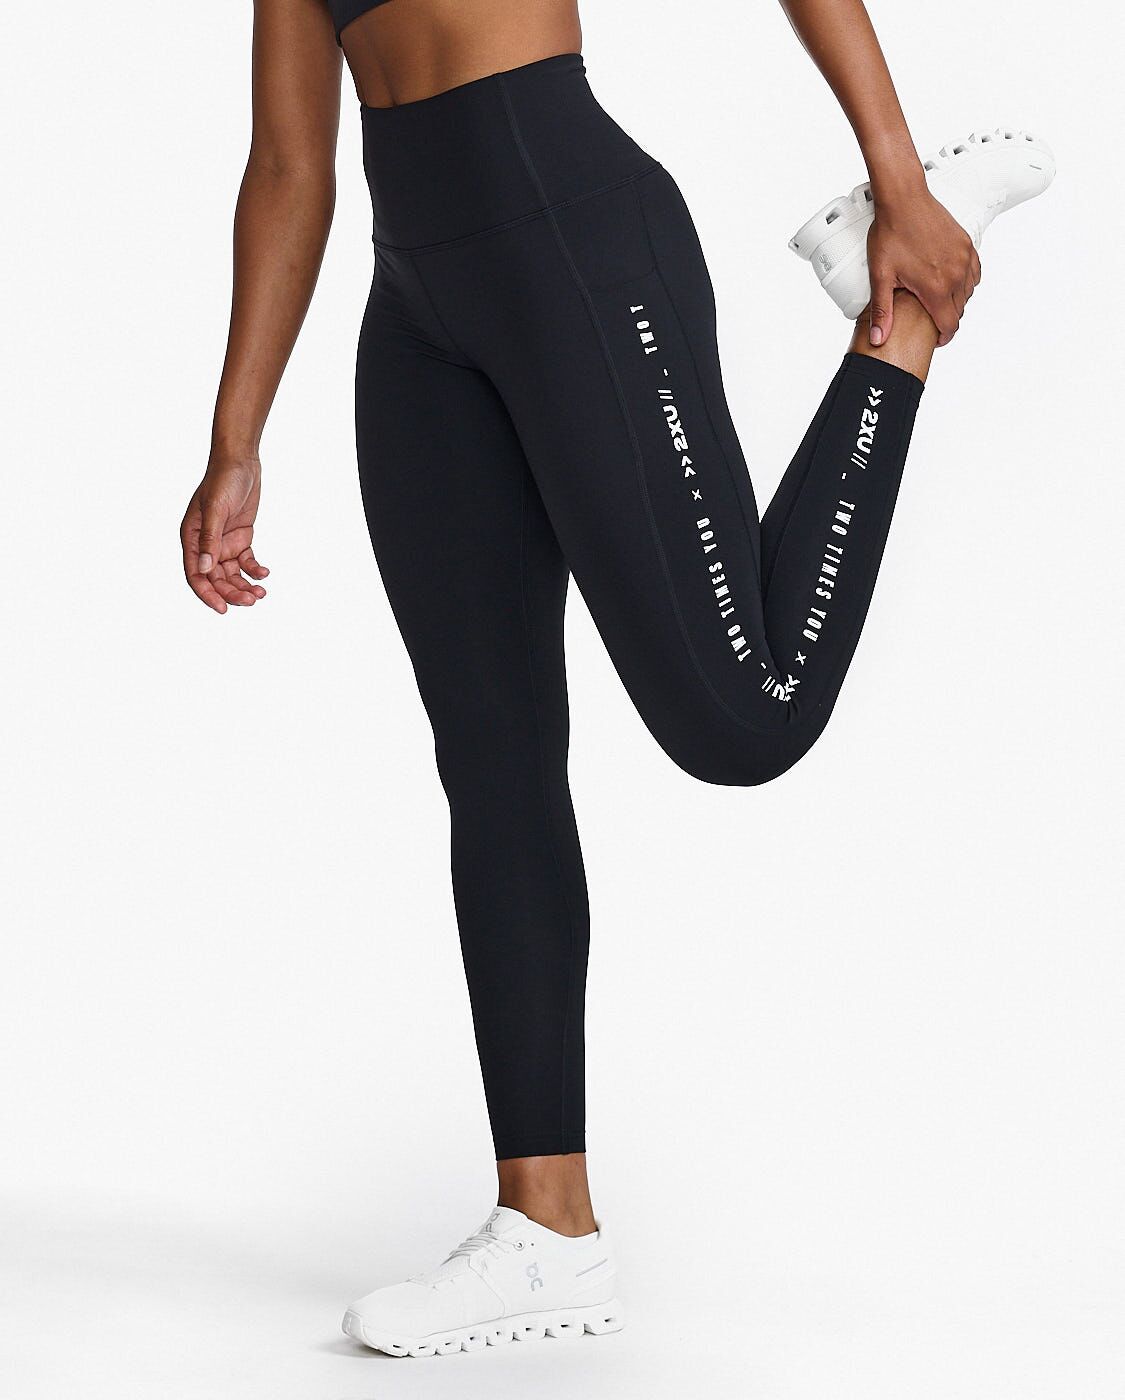 2XU South Africa - Womens Form Lineup Hi-Rise Comp Tight - BLK/WHT